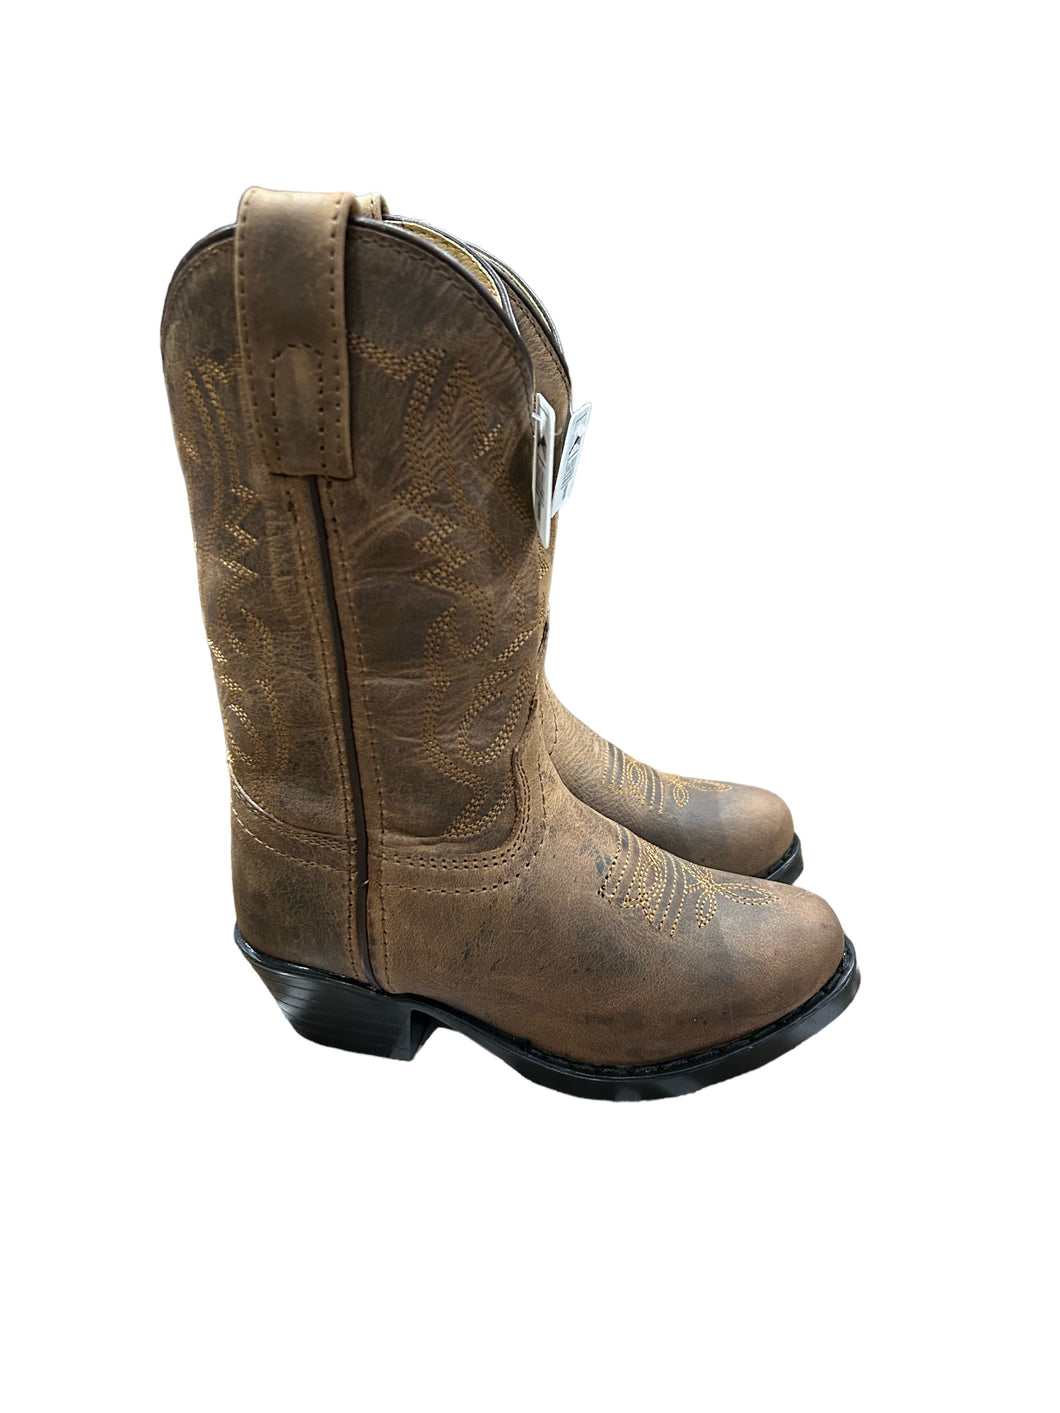 Smoky Mountain Boots 3034C Denver Brown Western Kids Boots